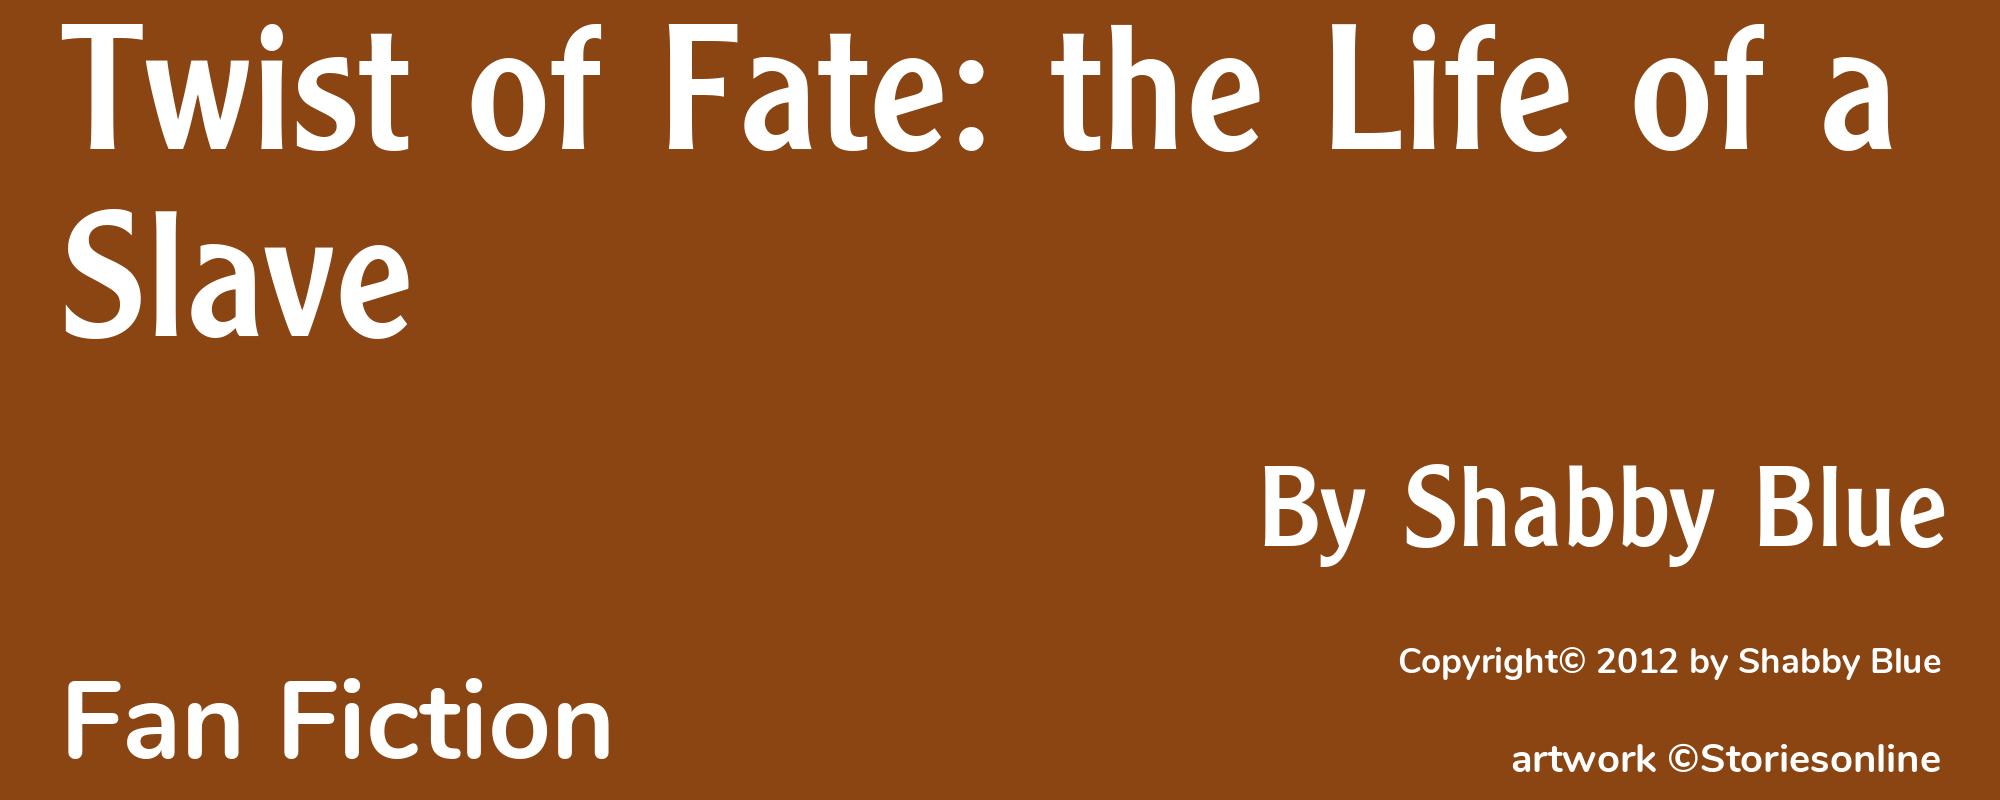 Twist of Fate: the Life of a Slave - Cover